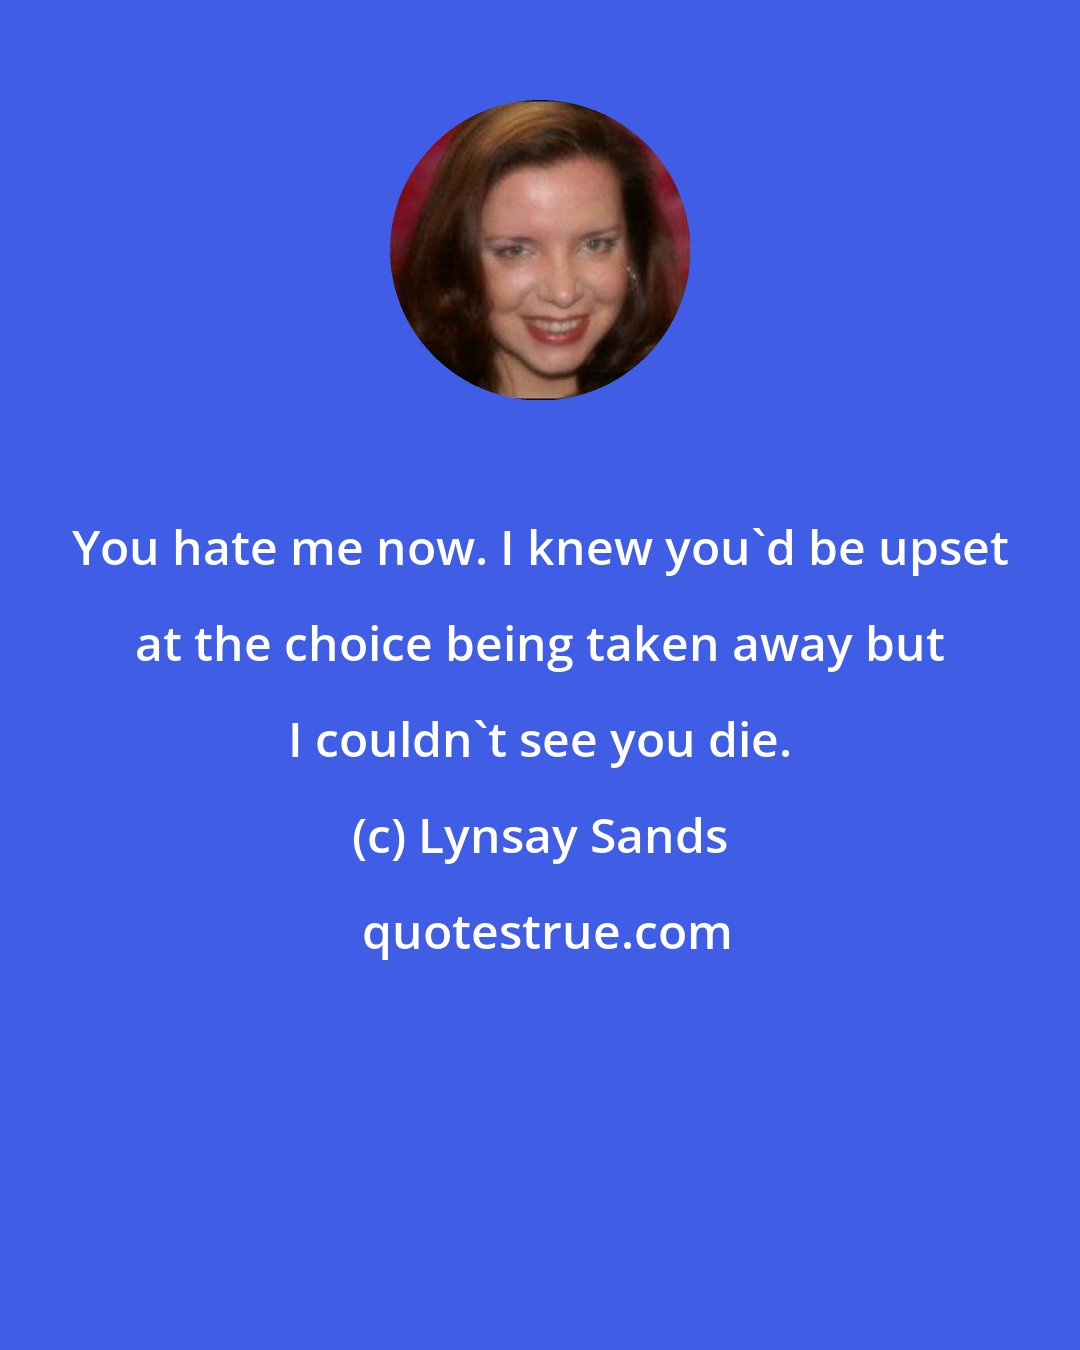 Lynsay Sands: You hate me now. I knew you'd be upset at the choice being taken away but I couldn't see you die.